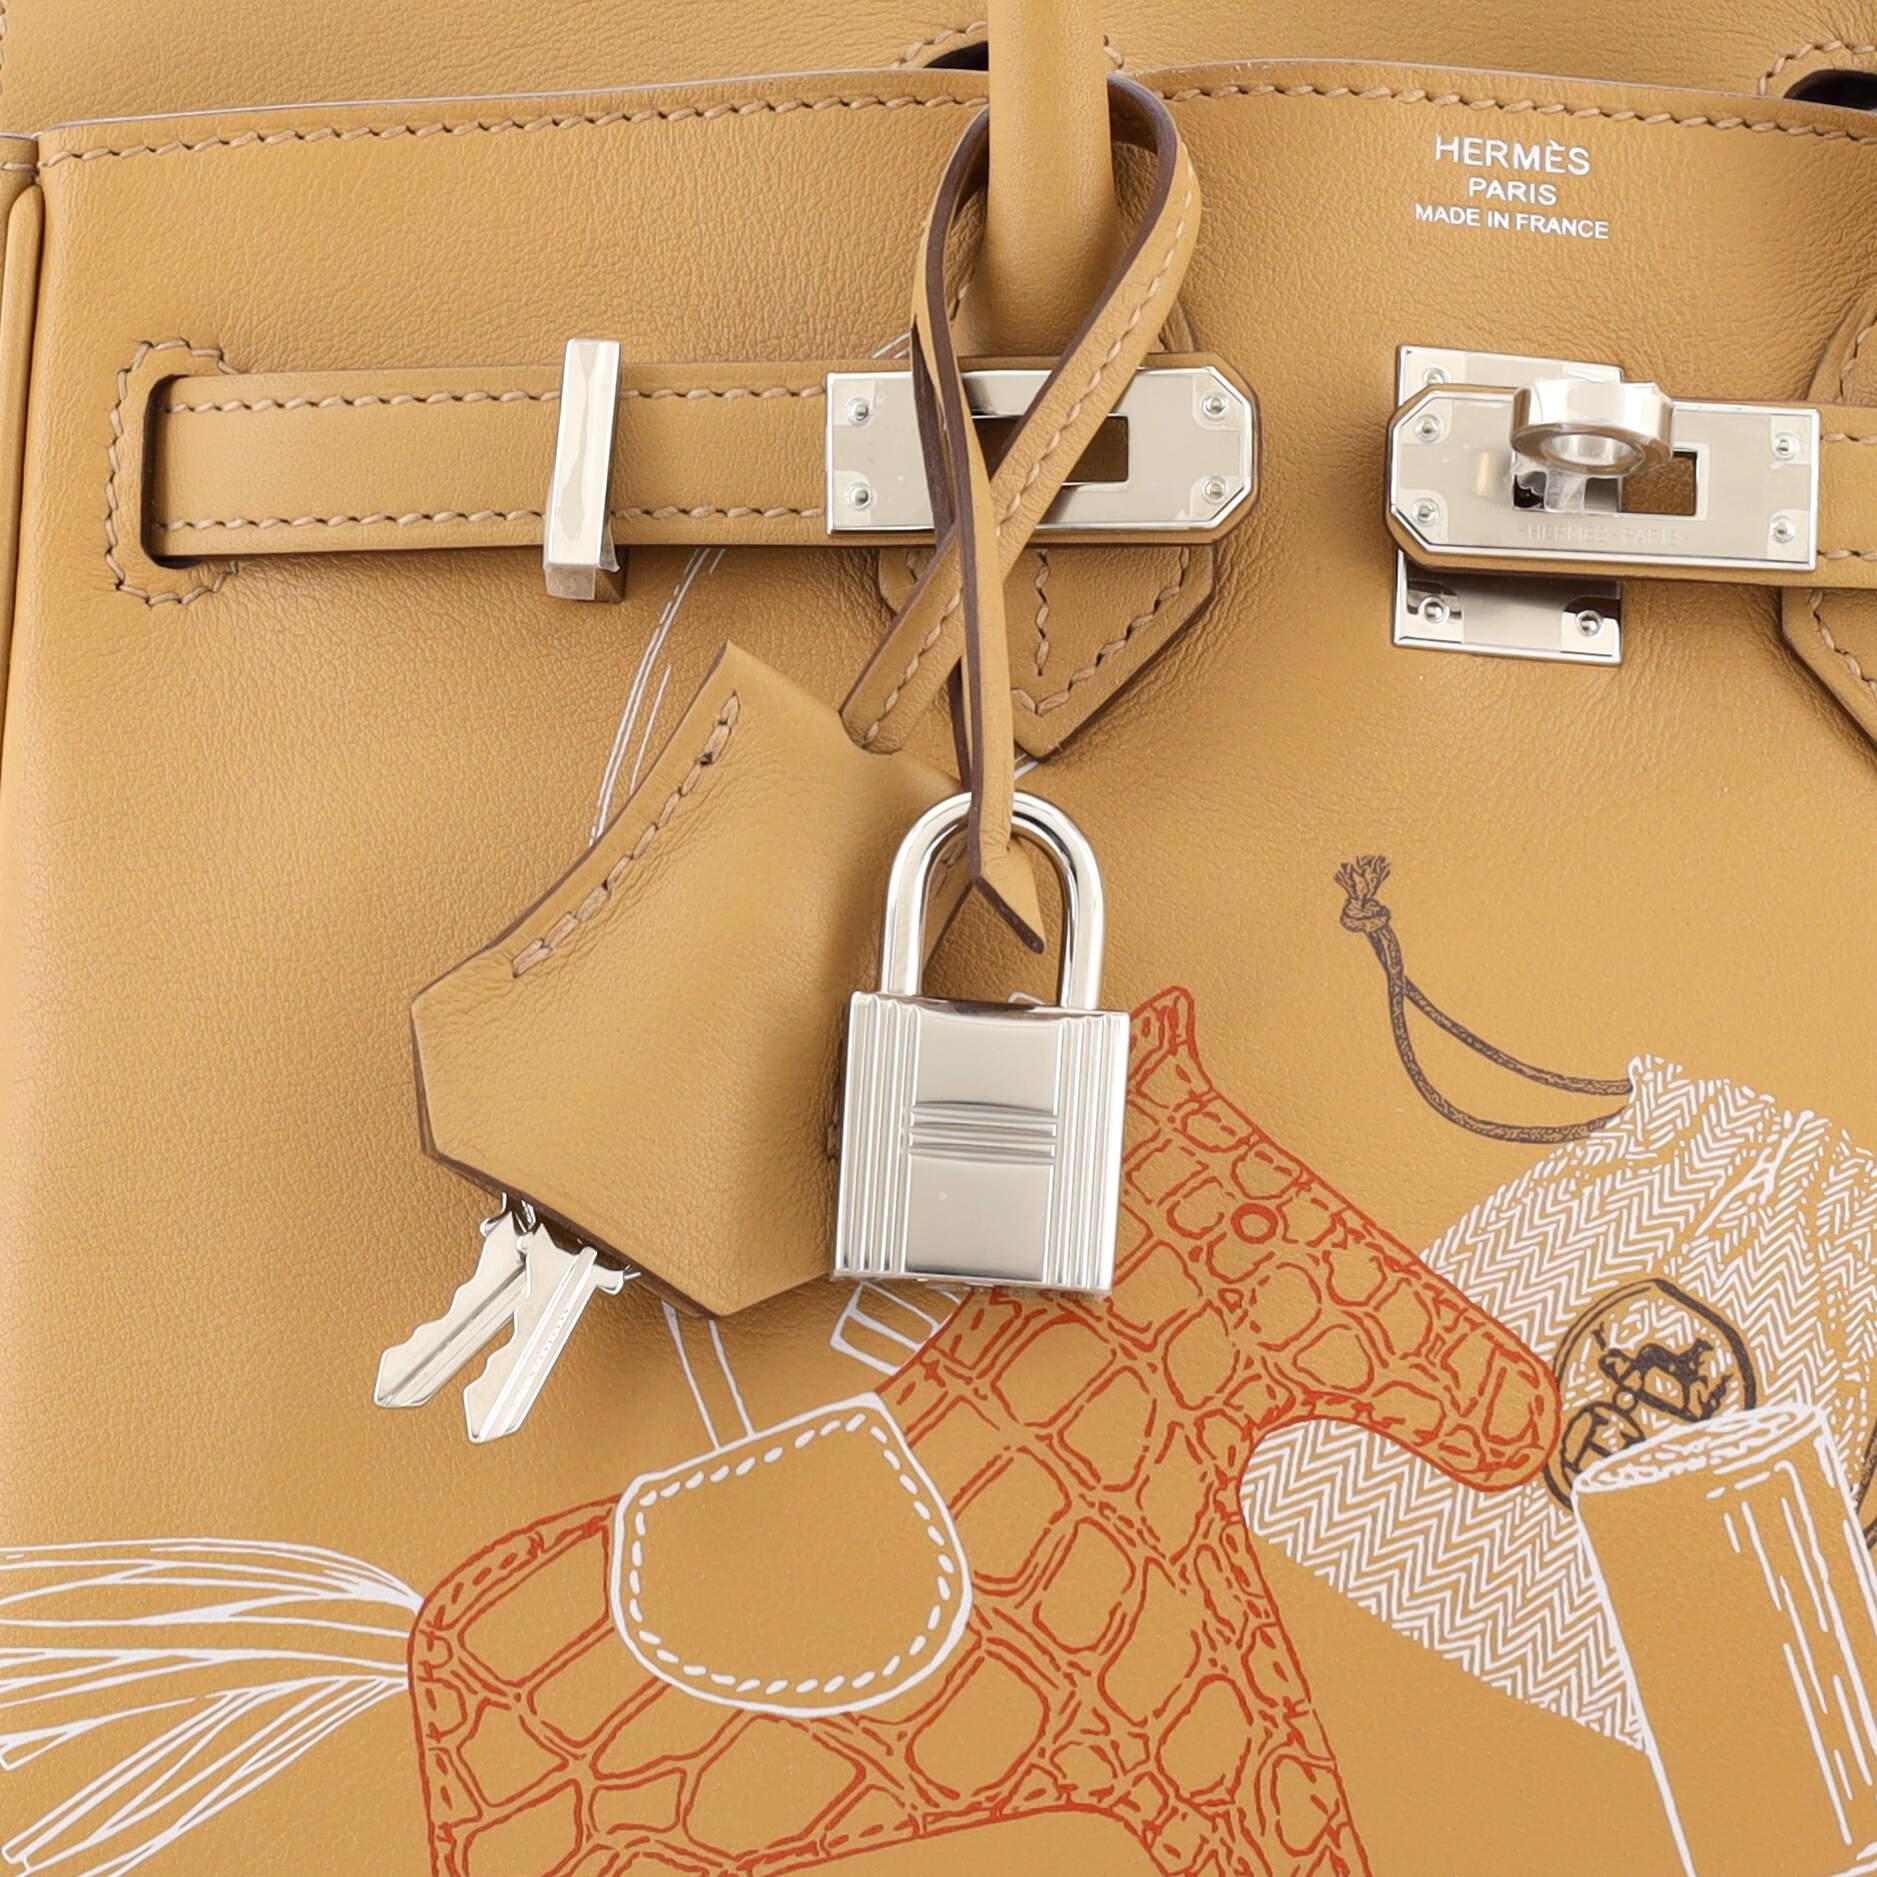 Hermes In and Out Birkin Bag Limited Edition Swift with Palladium Hardware 25 2